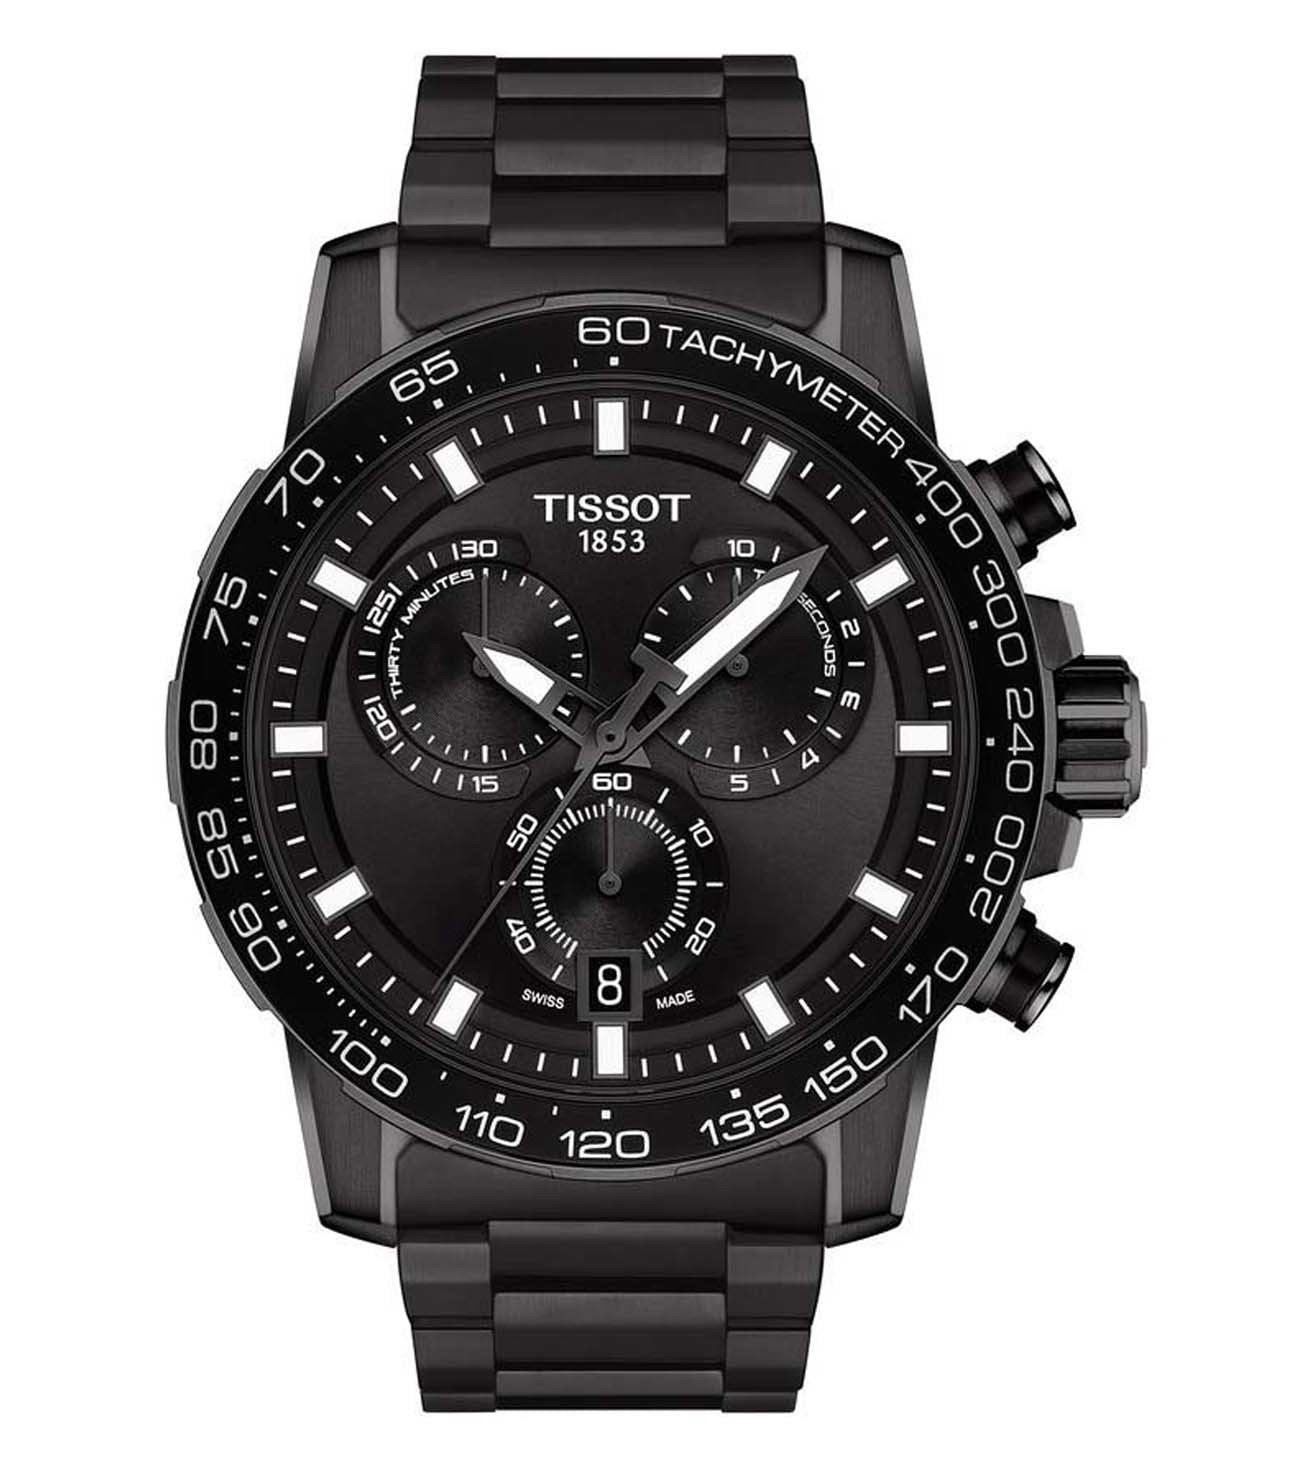 T1256173305100  |  TISSOT SUPERSPORT CHRONO Chronograph Watch for Men